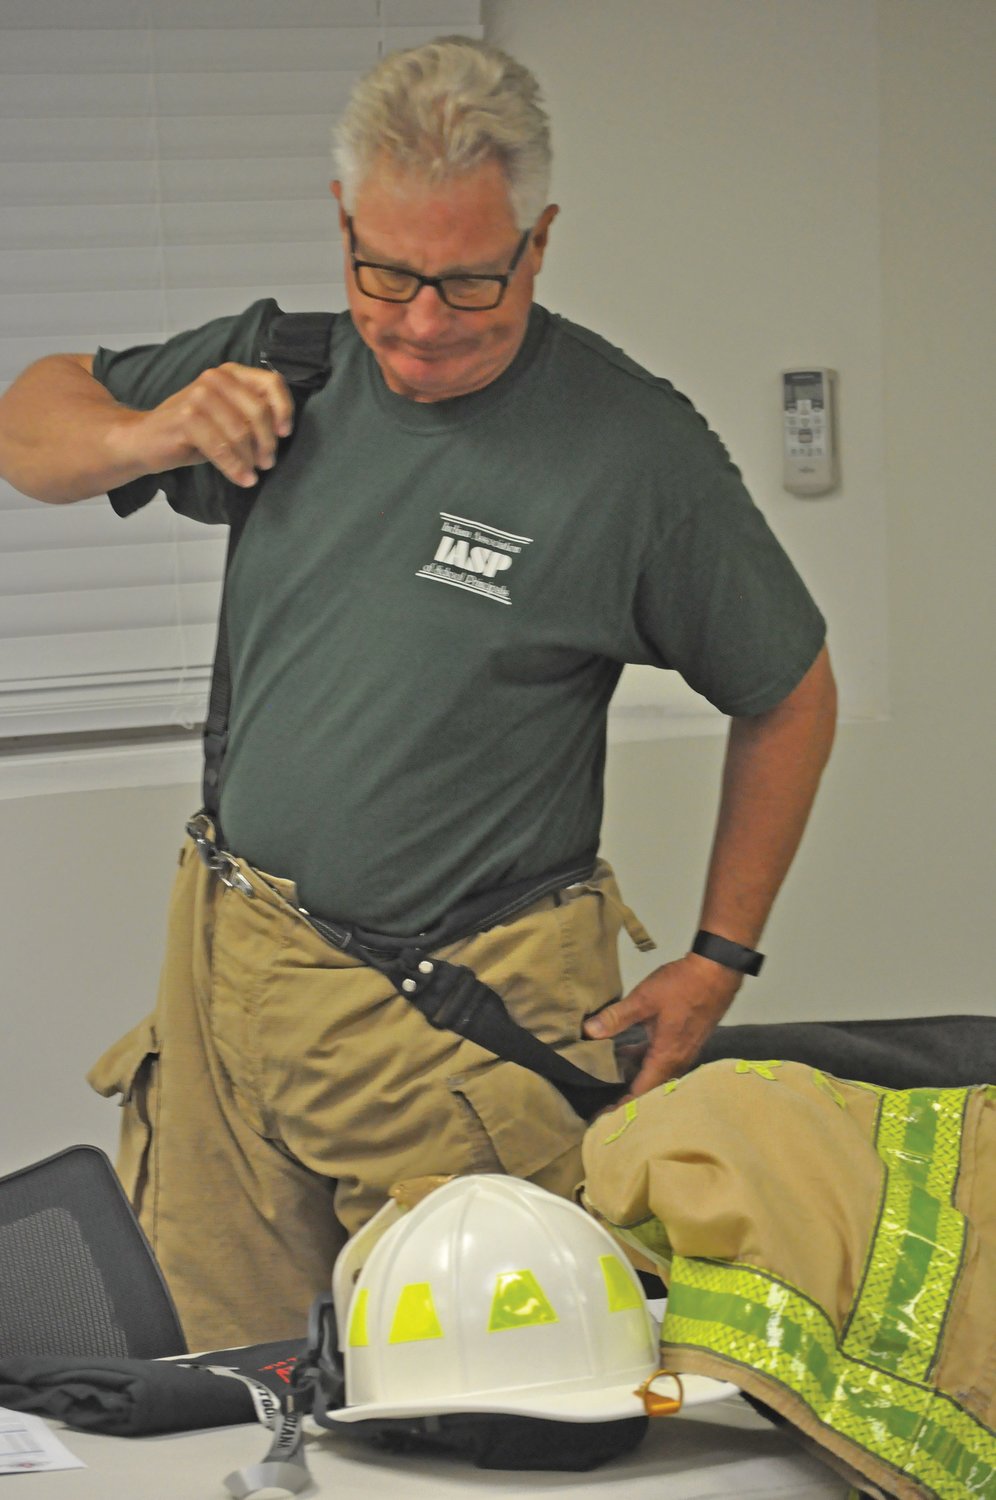 Montgomery County Council President Tom Mellish suits up for Fire Ops 101 at the Public Safety Building on Elmore Street on Saturday. The educational event for elected and appointed officials was organized by Crawfordsville Professional Firefighter